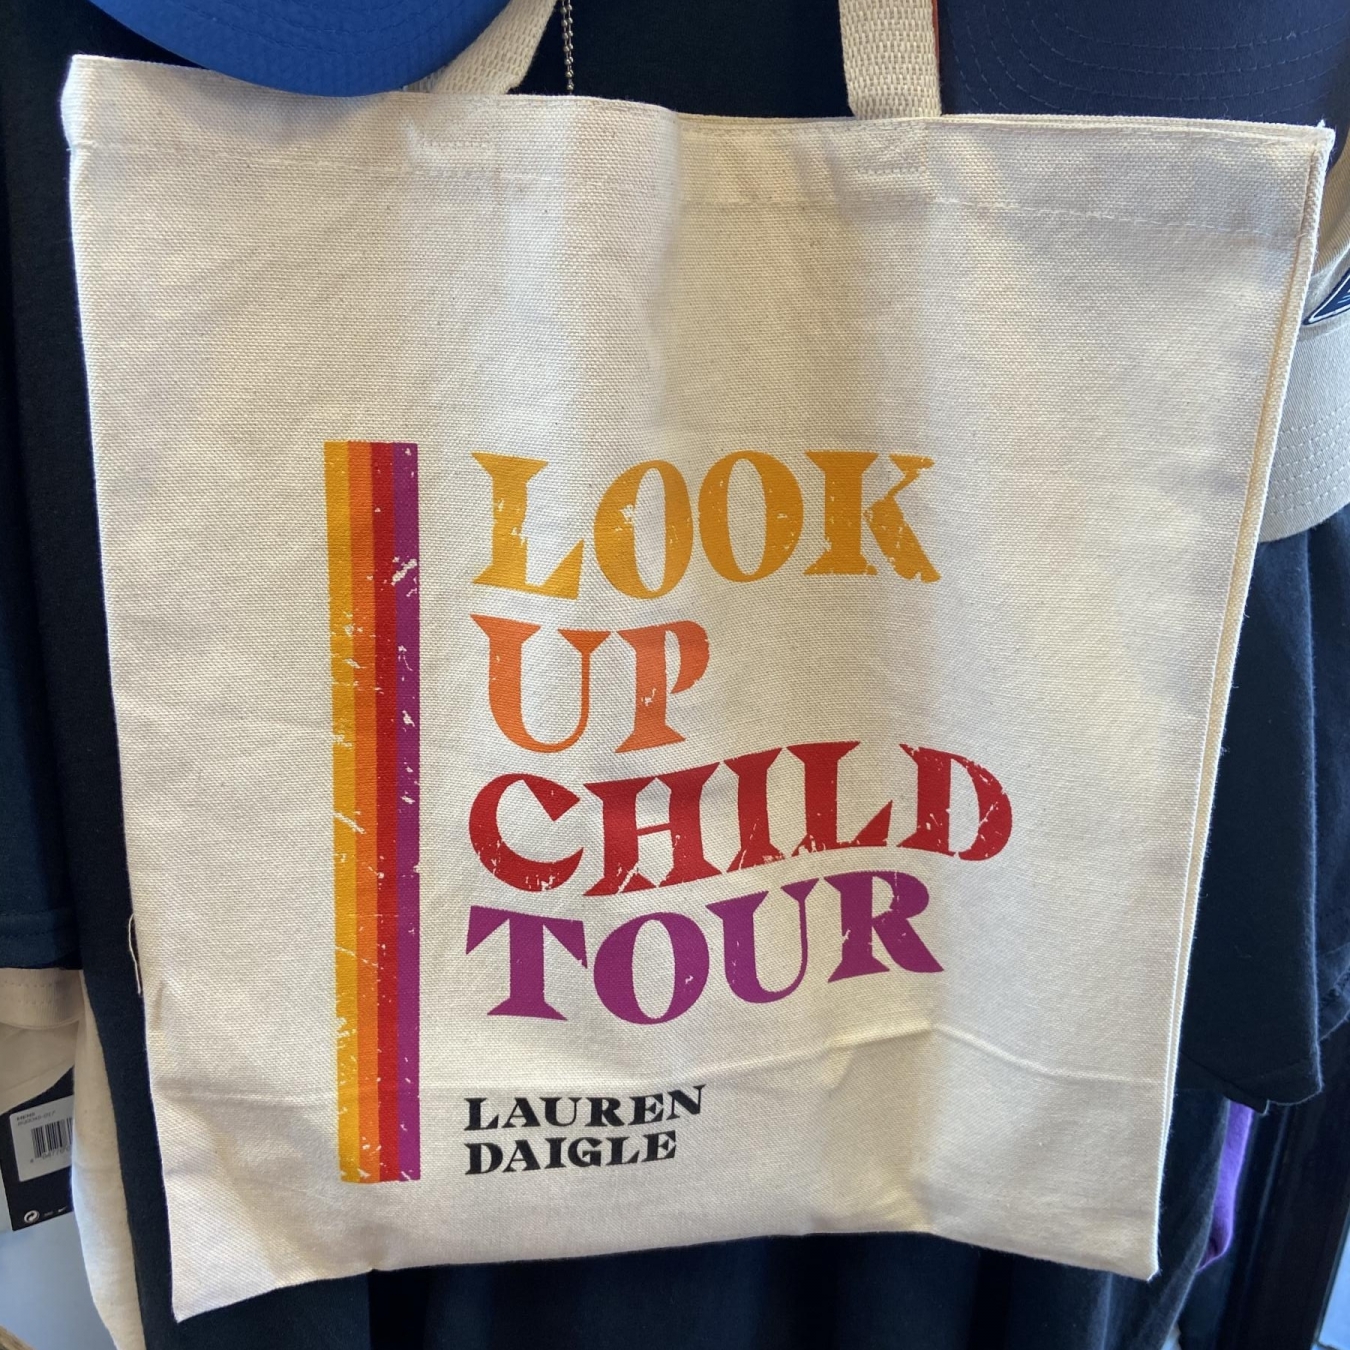 Look Up Child Tour Screen printed Tote Bag